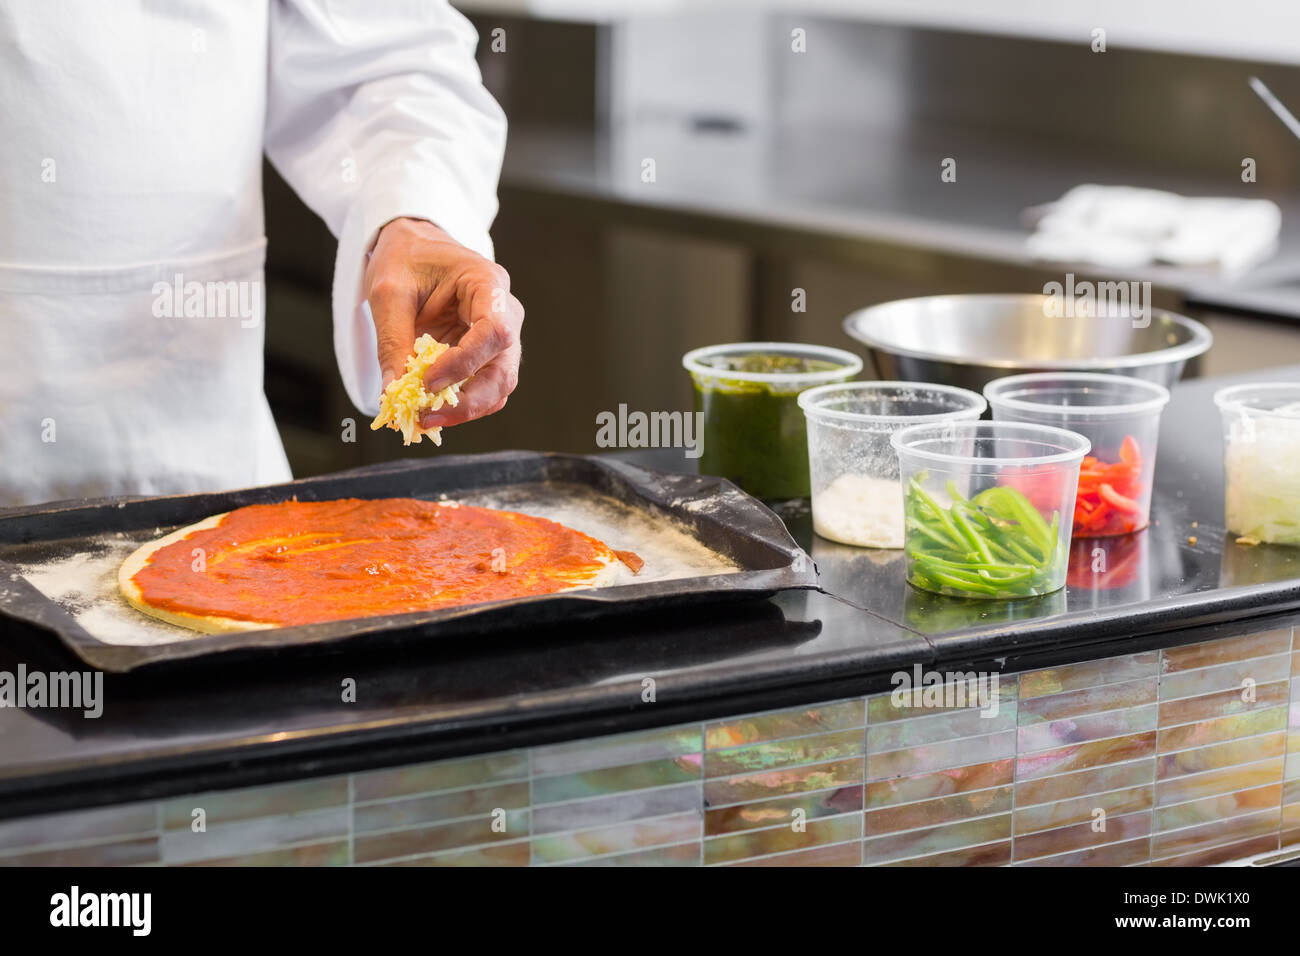 Mid section of chef garnishing food in kitchen Stock Photo